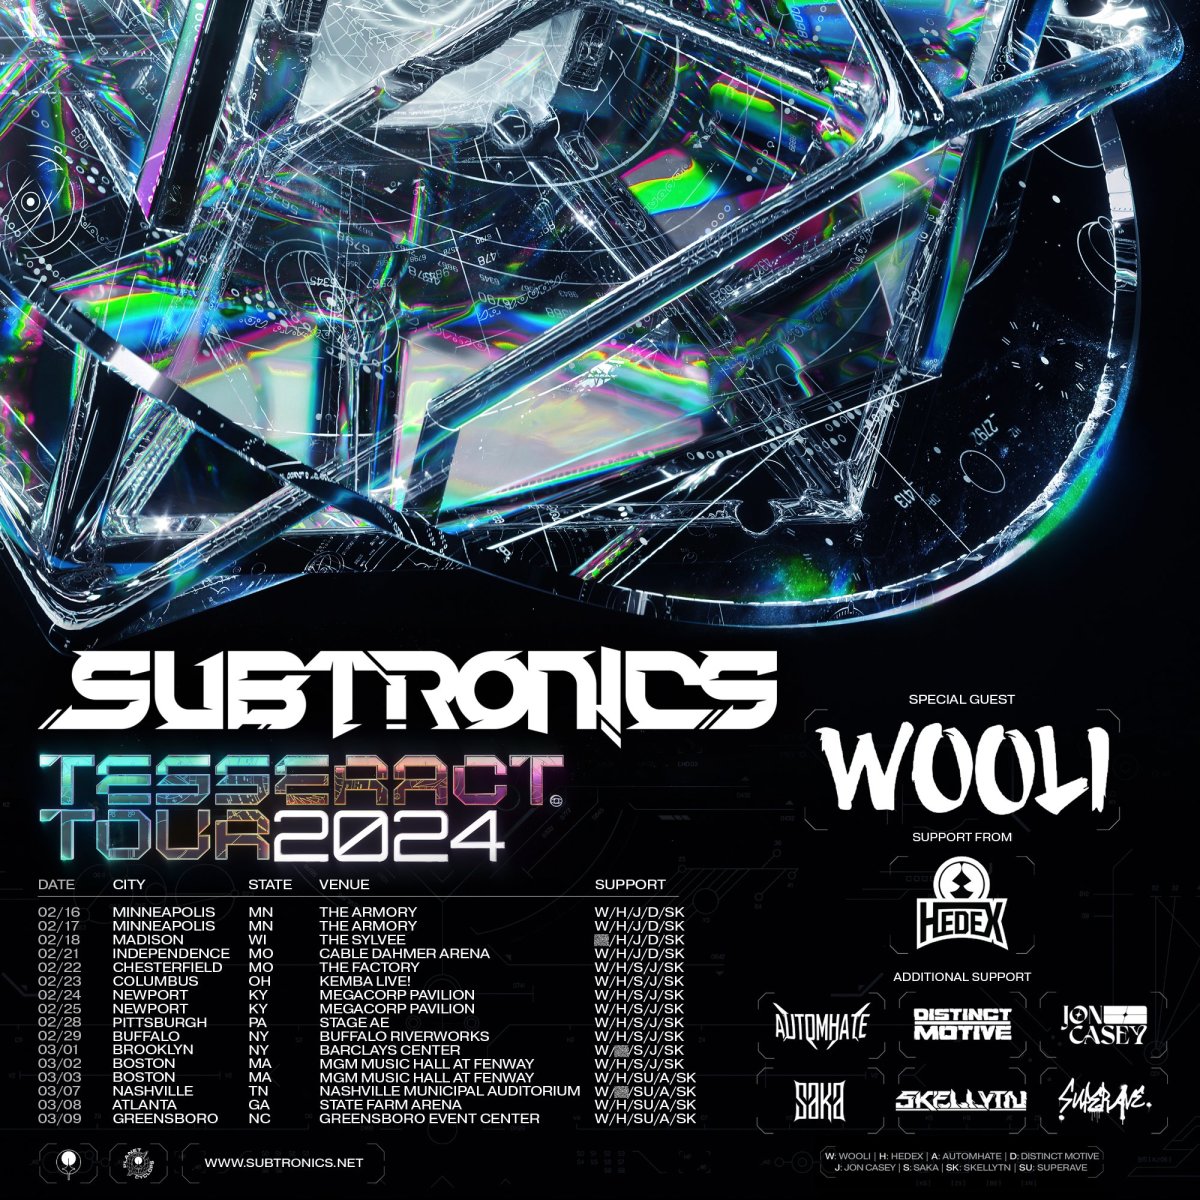 Subtronics Unveils "TESSERACT" Tour With Support From Wooli, Hedex